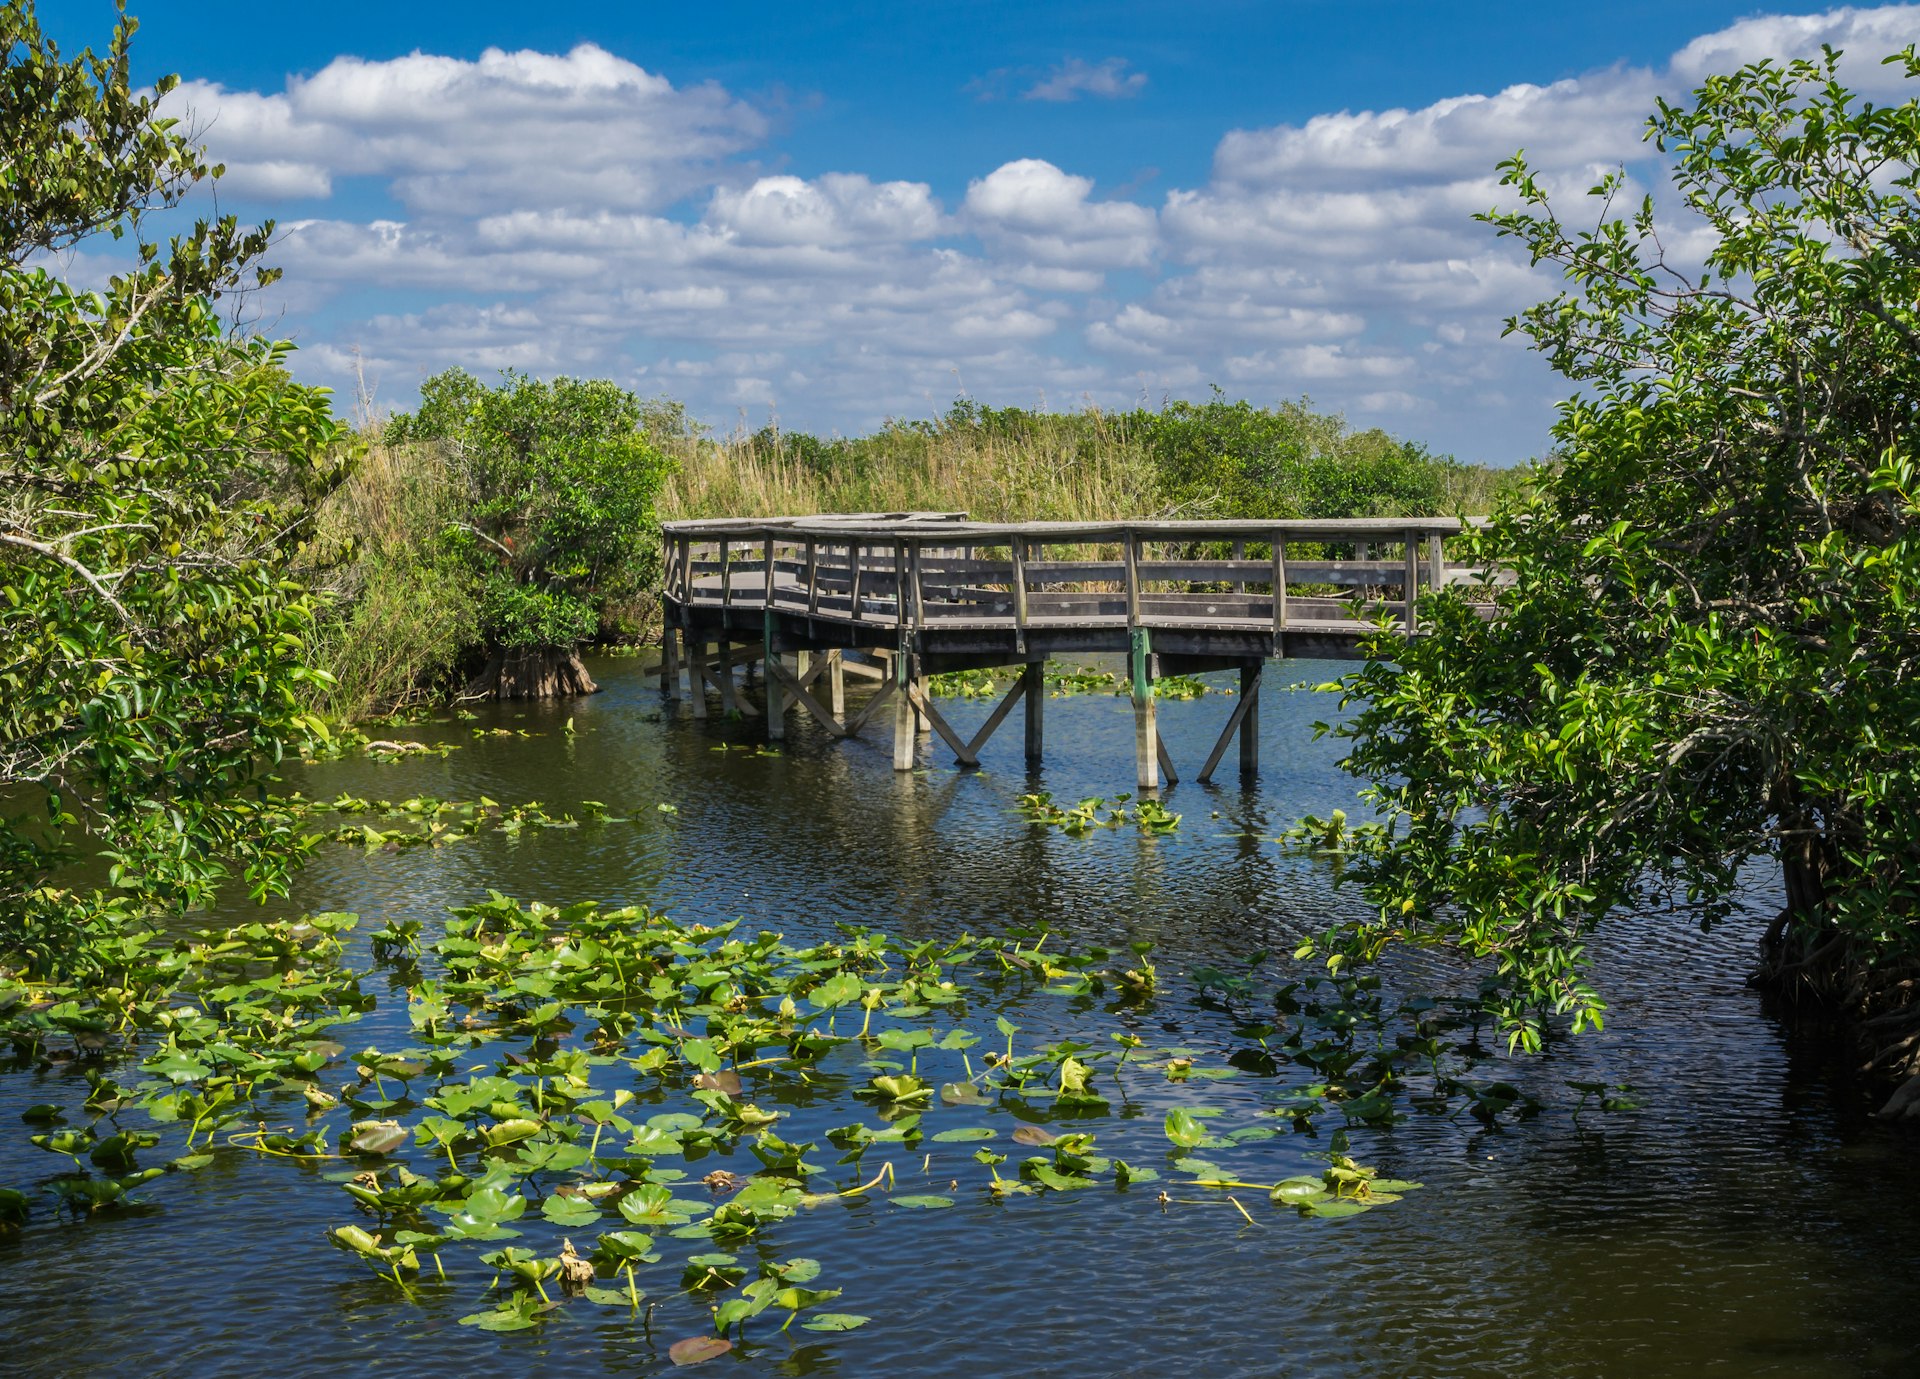 A wooden boardwalk above a body of water covered in lilypads